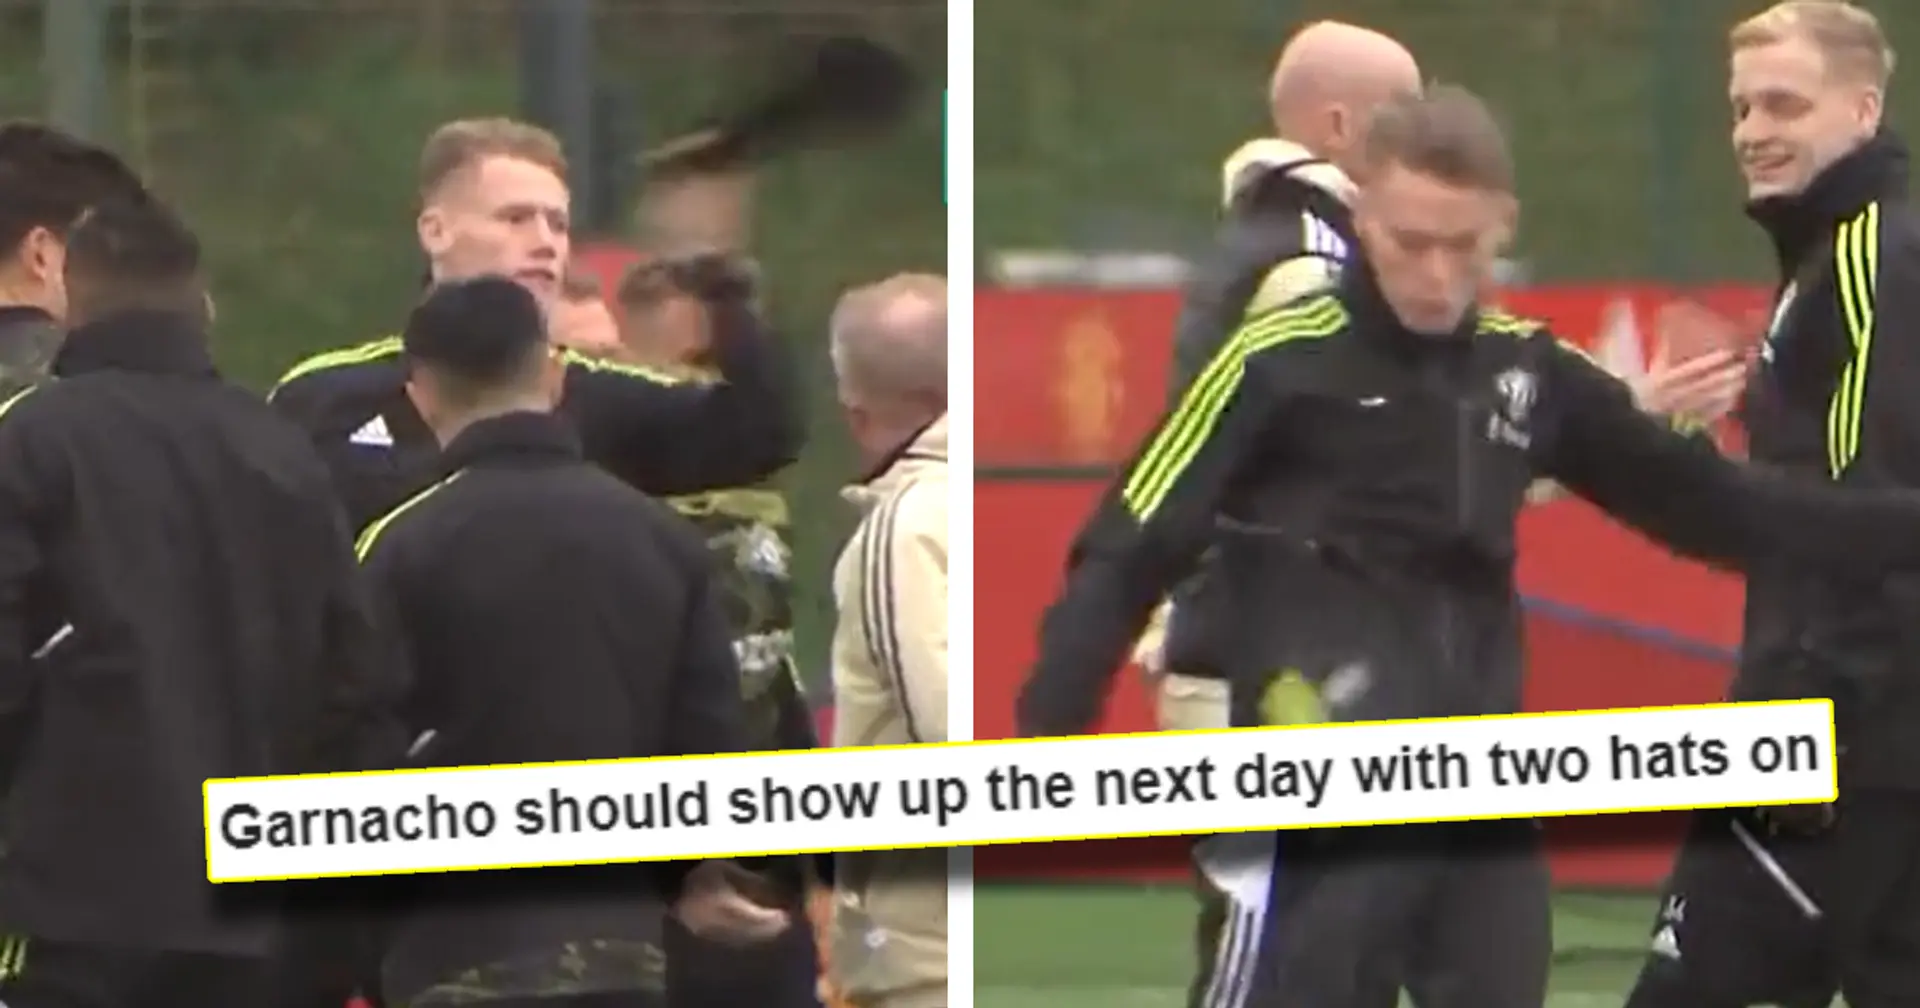 'McTroublesome': McTominay flicks Garnacho's hat in training — fans react hilariously